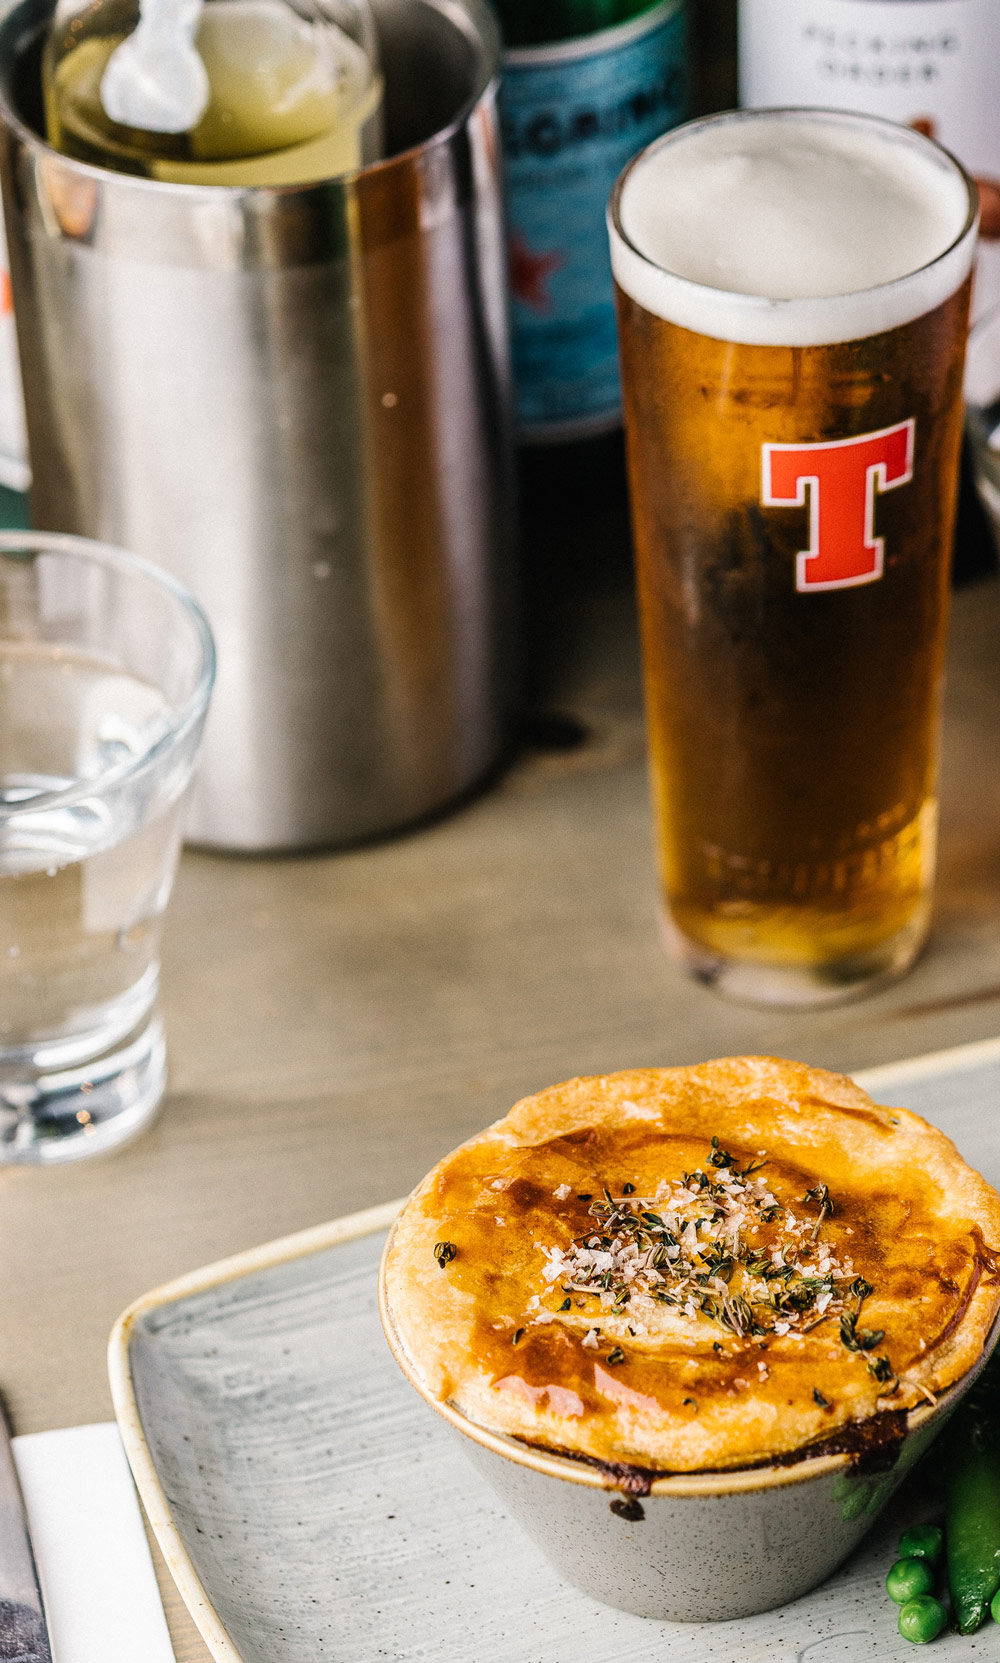 Pie and a pint of Tennents